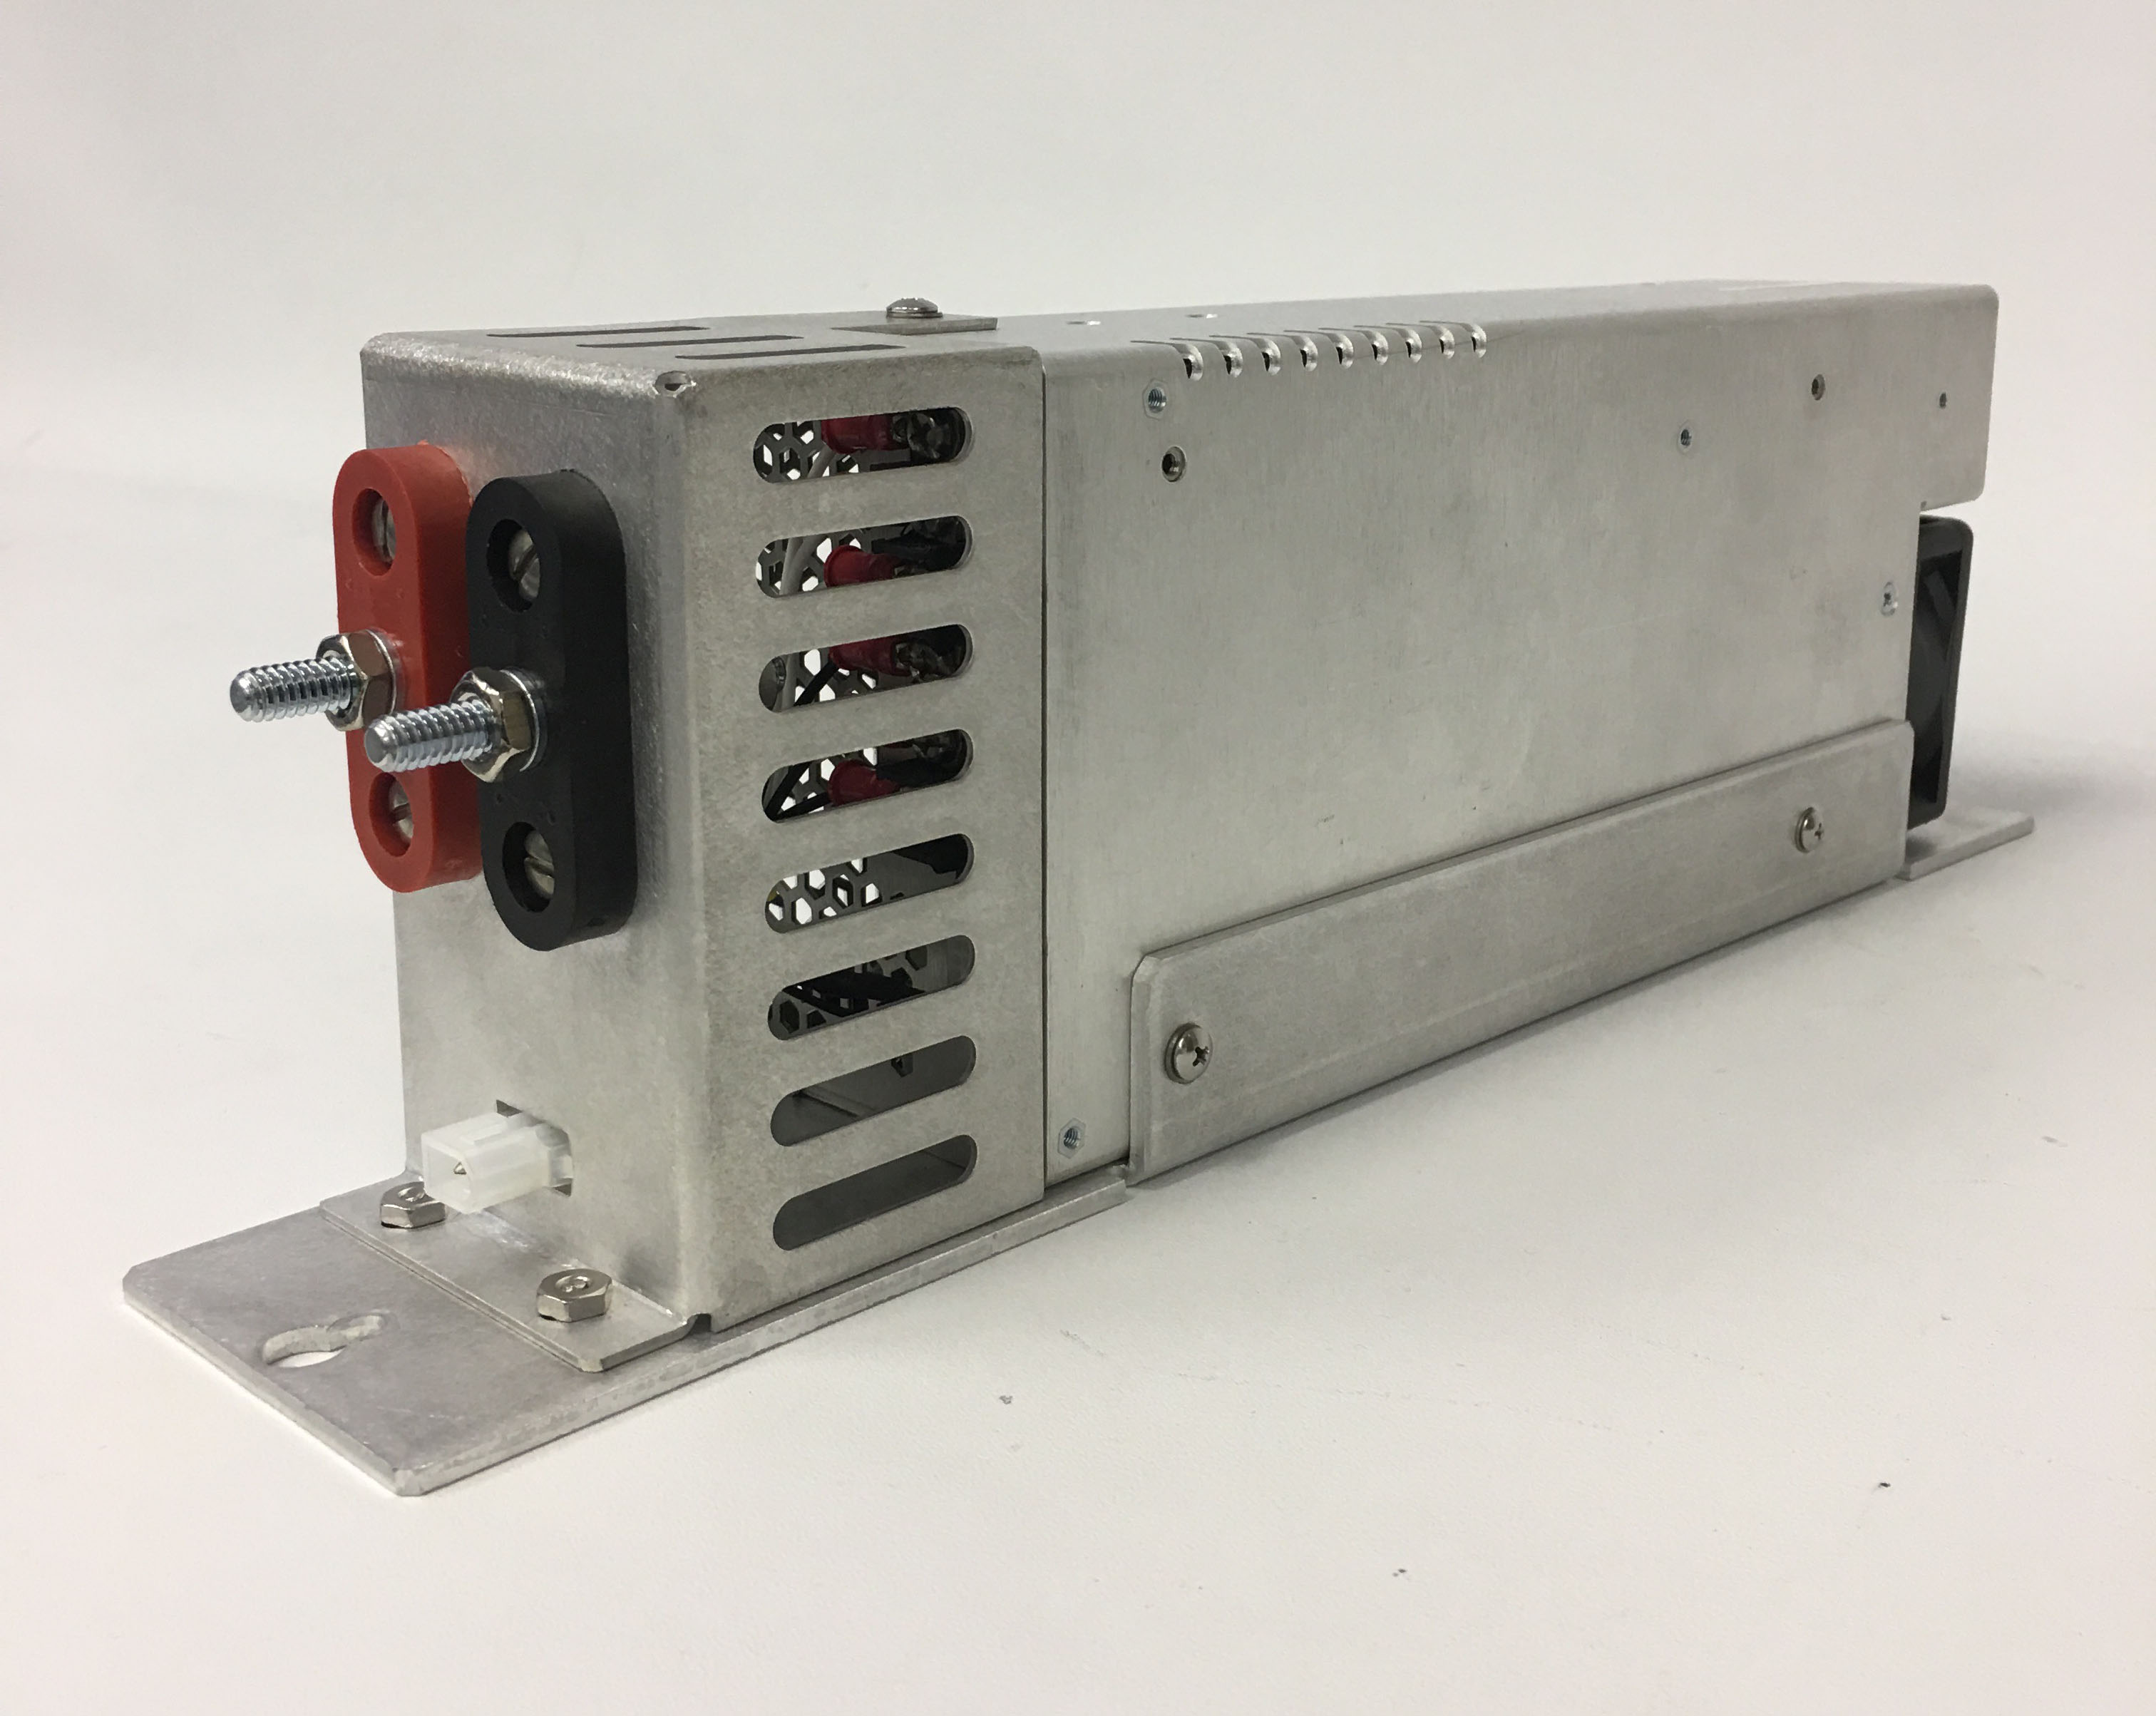 SG660-091820-001 | Lam Research Power Supply 660-091820-001, 24 Volt DC